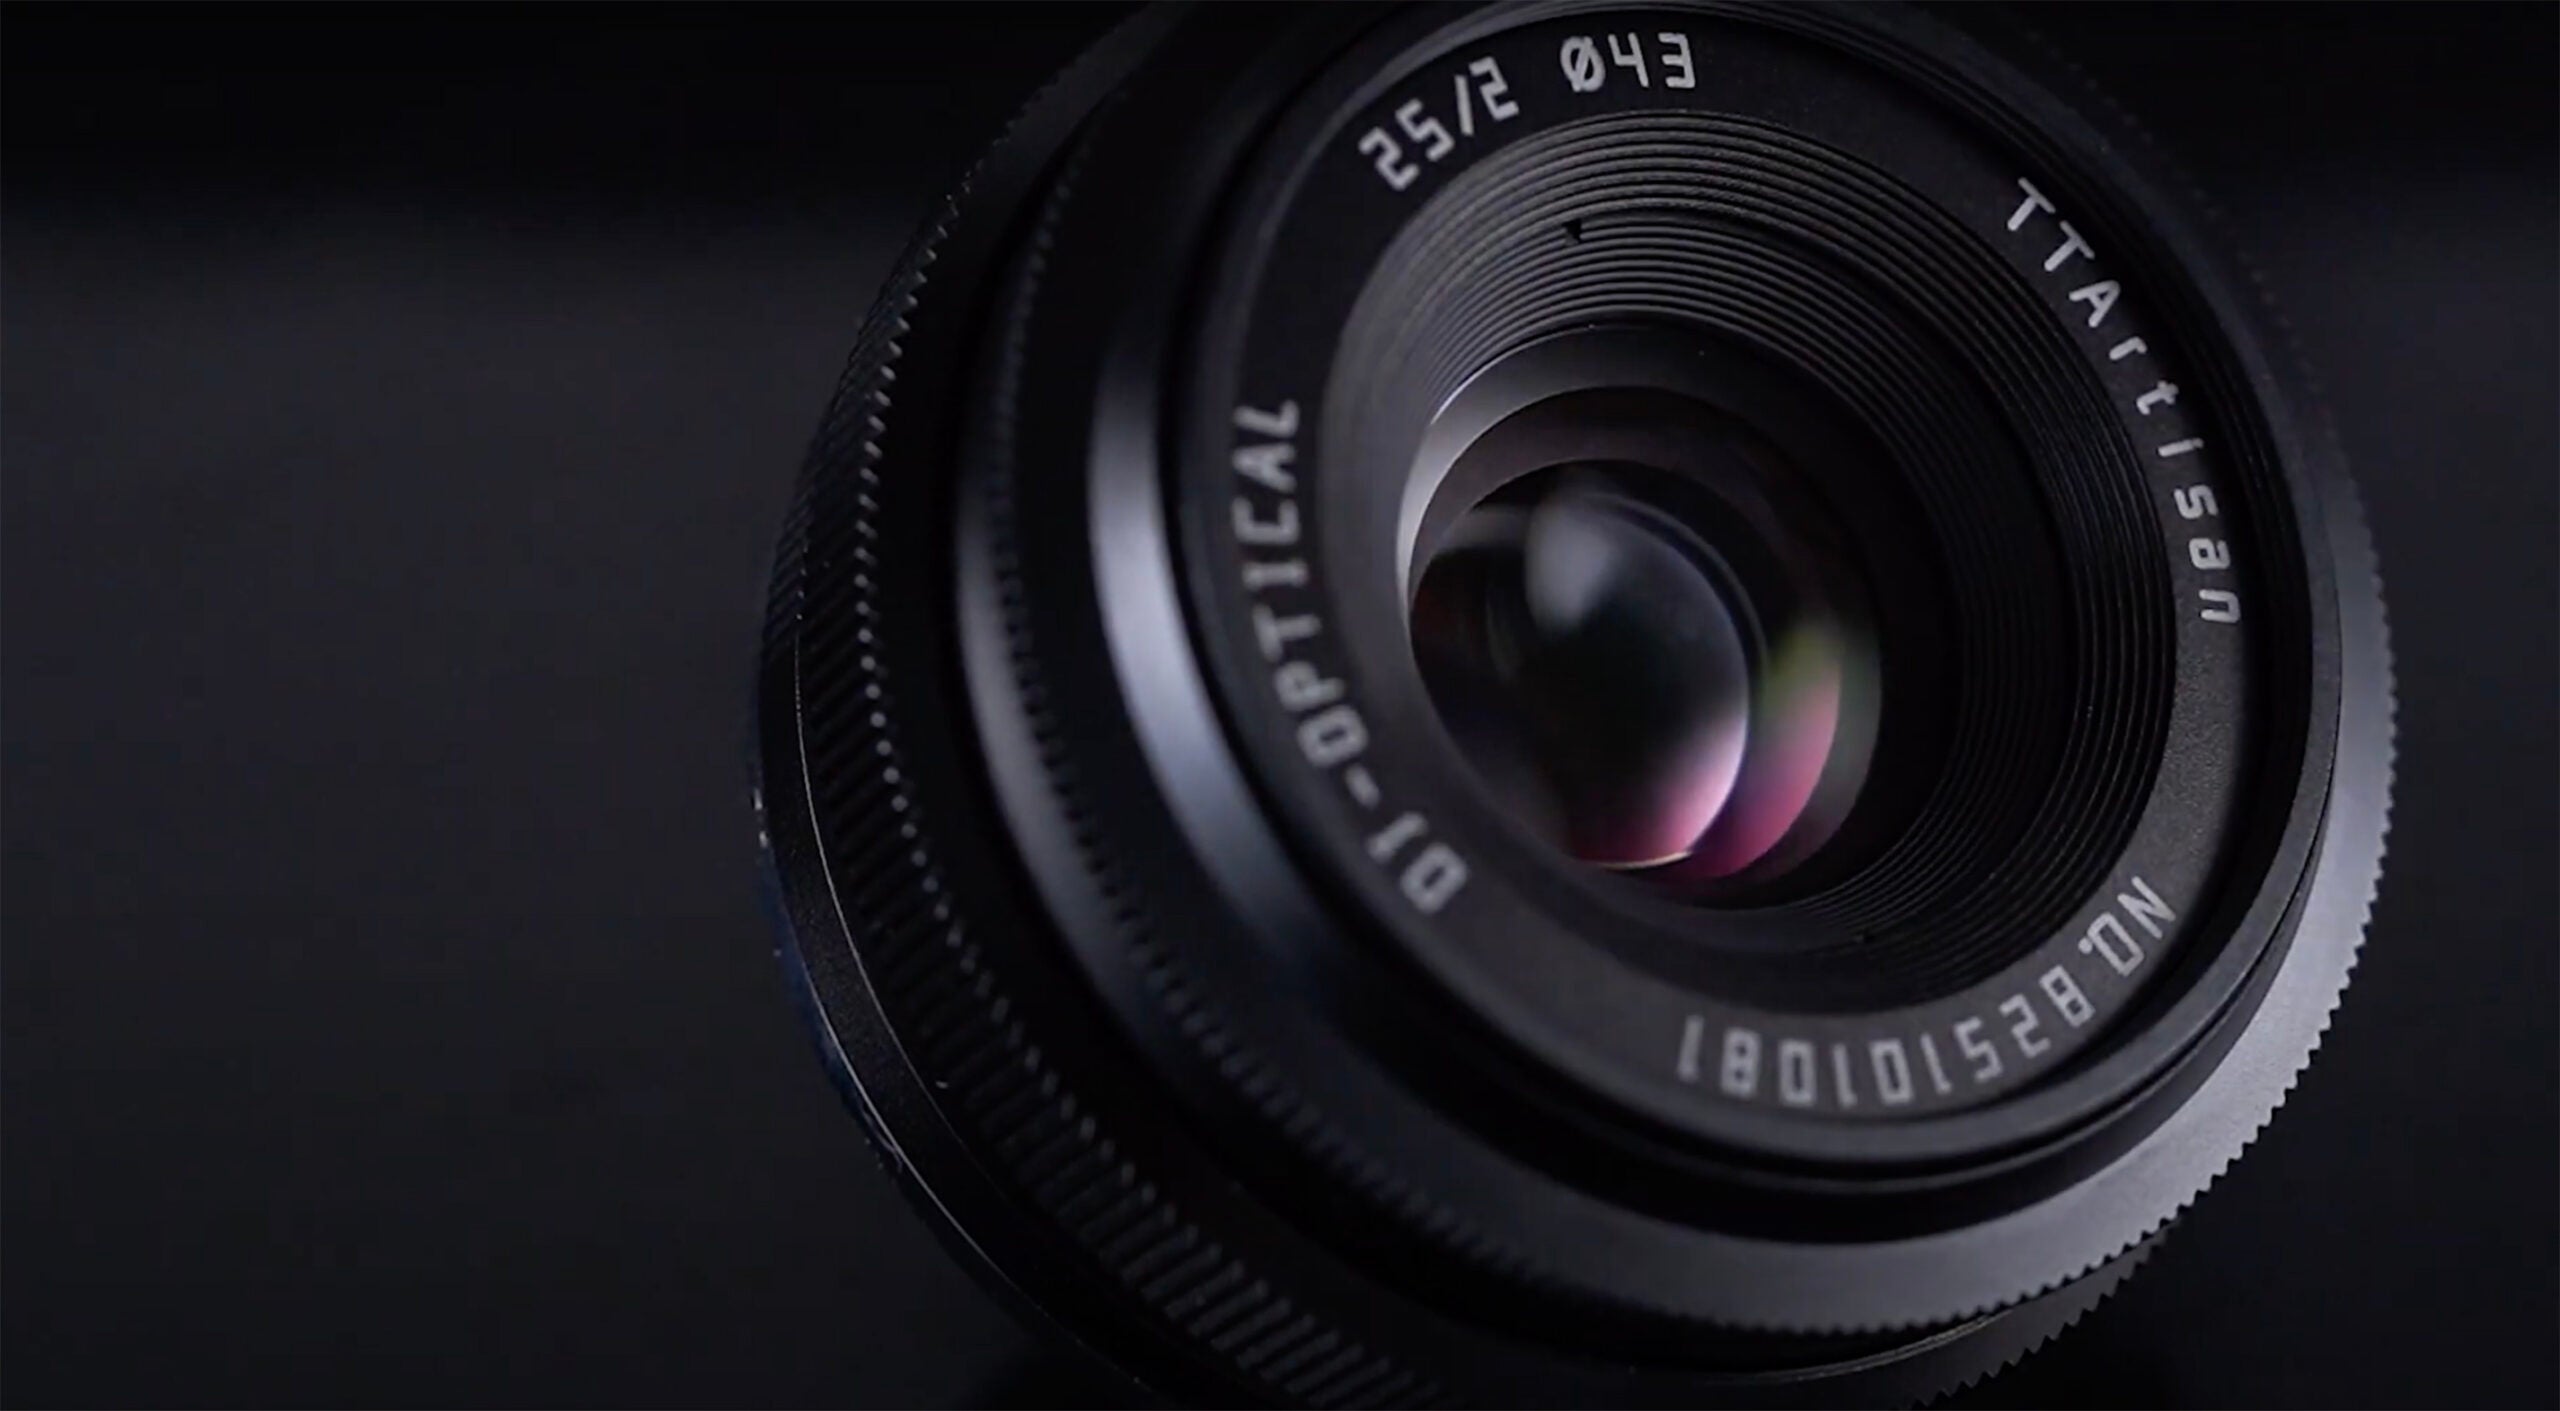 TTArtisan 25mm f/2 is an affordable manual prime | Popular Photography